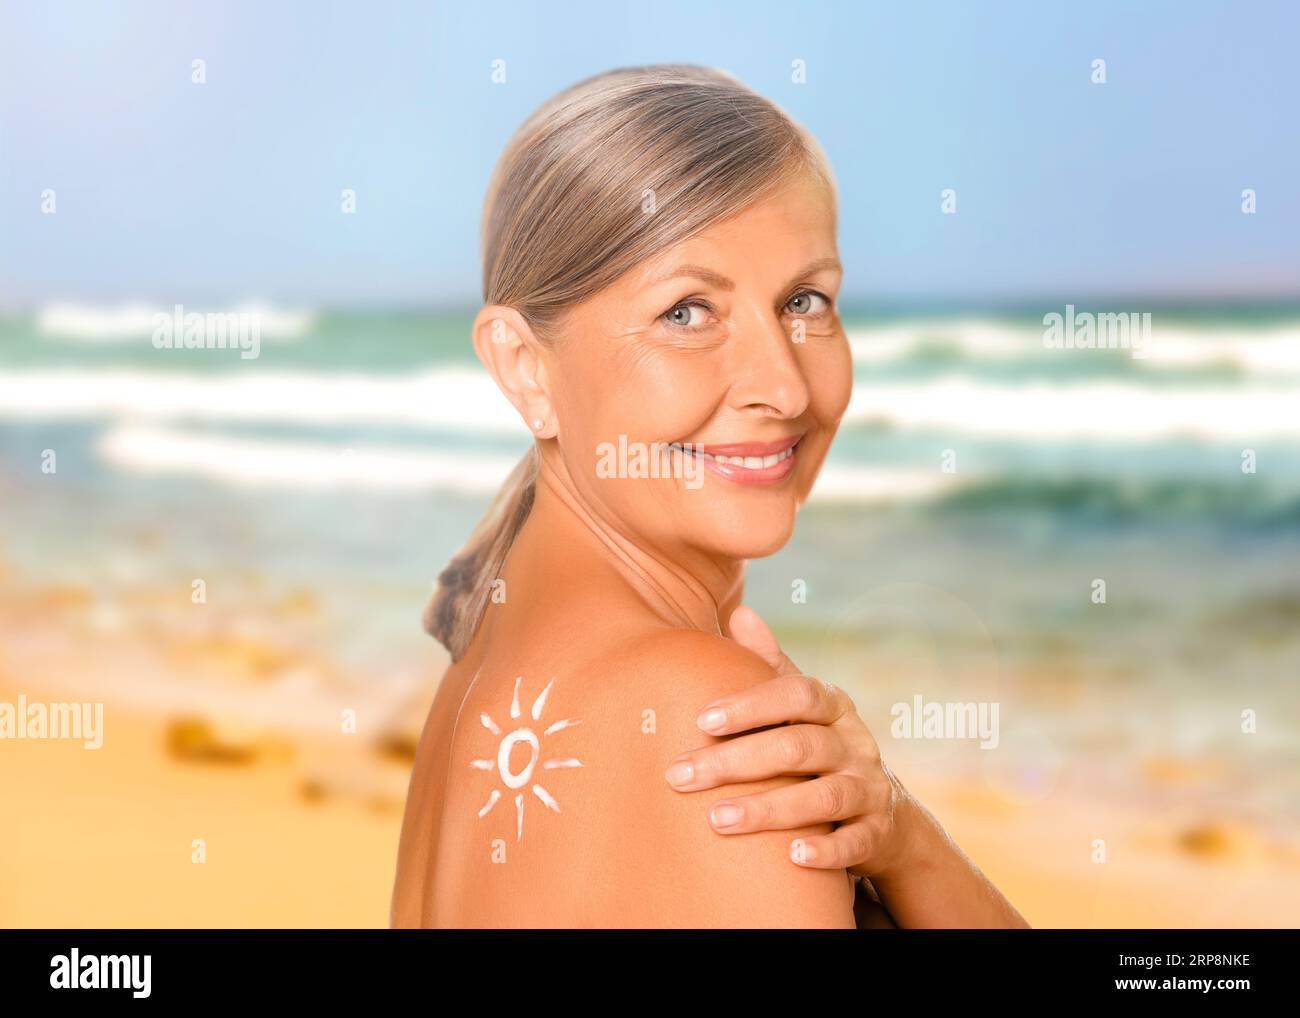 Sun protection. Beautiful young woman with sunblock on her back near sea Stock Photo